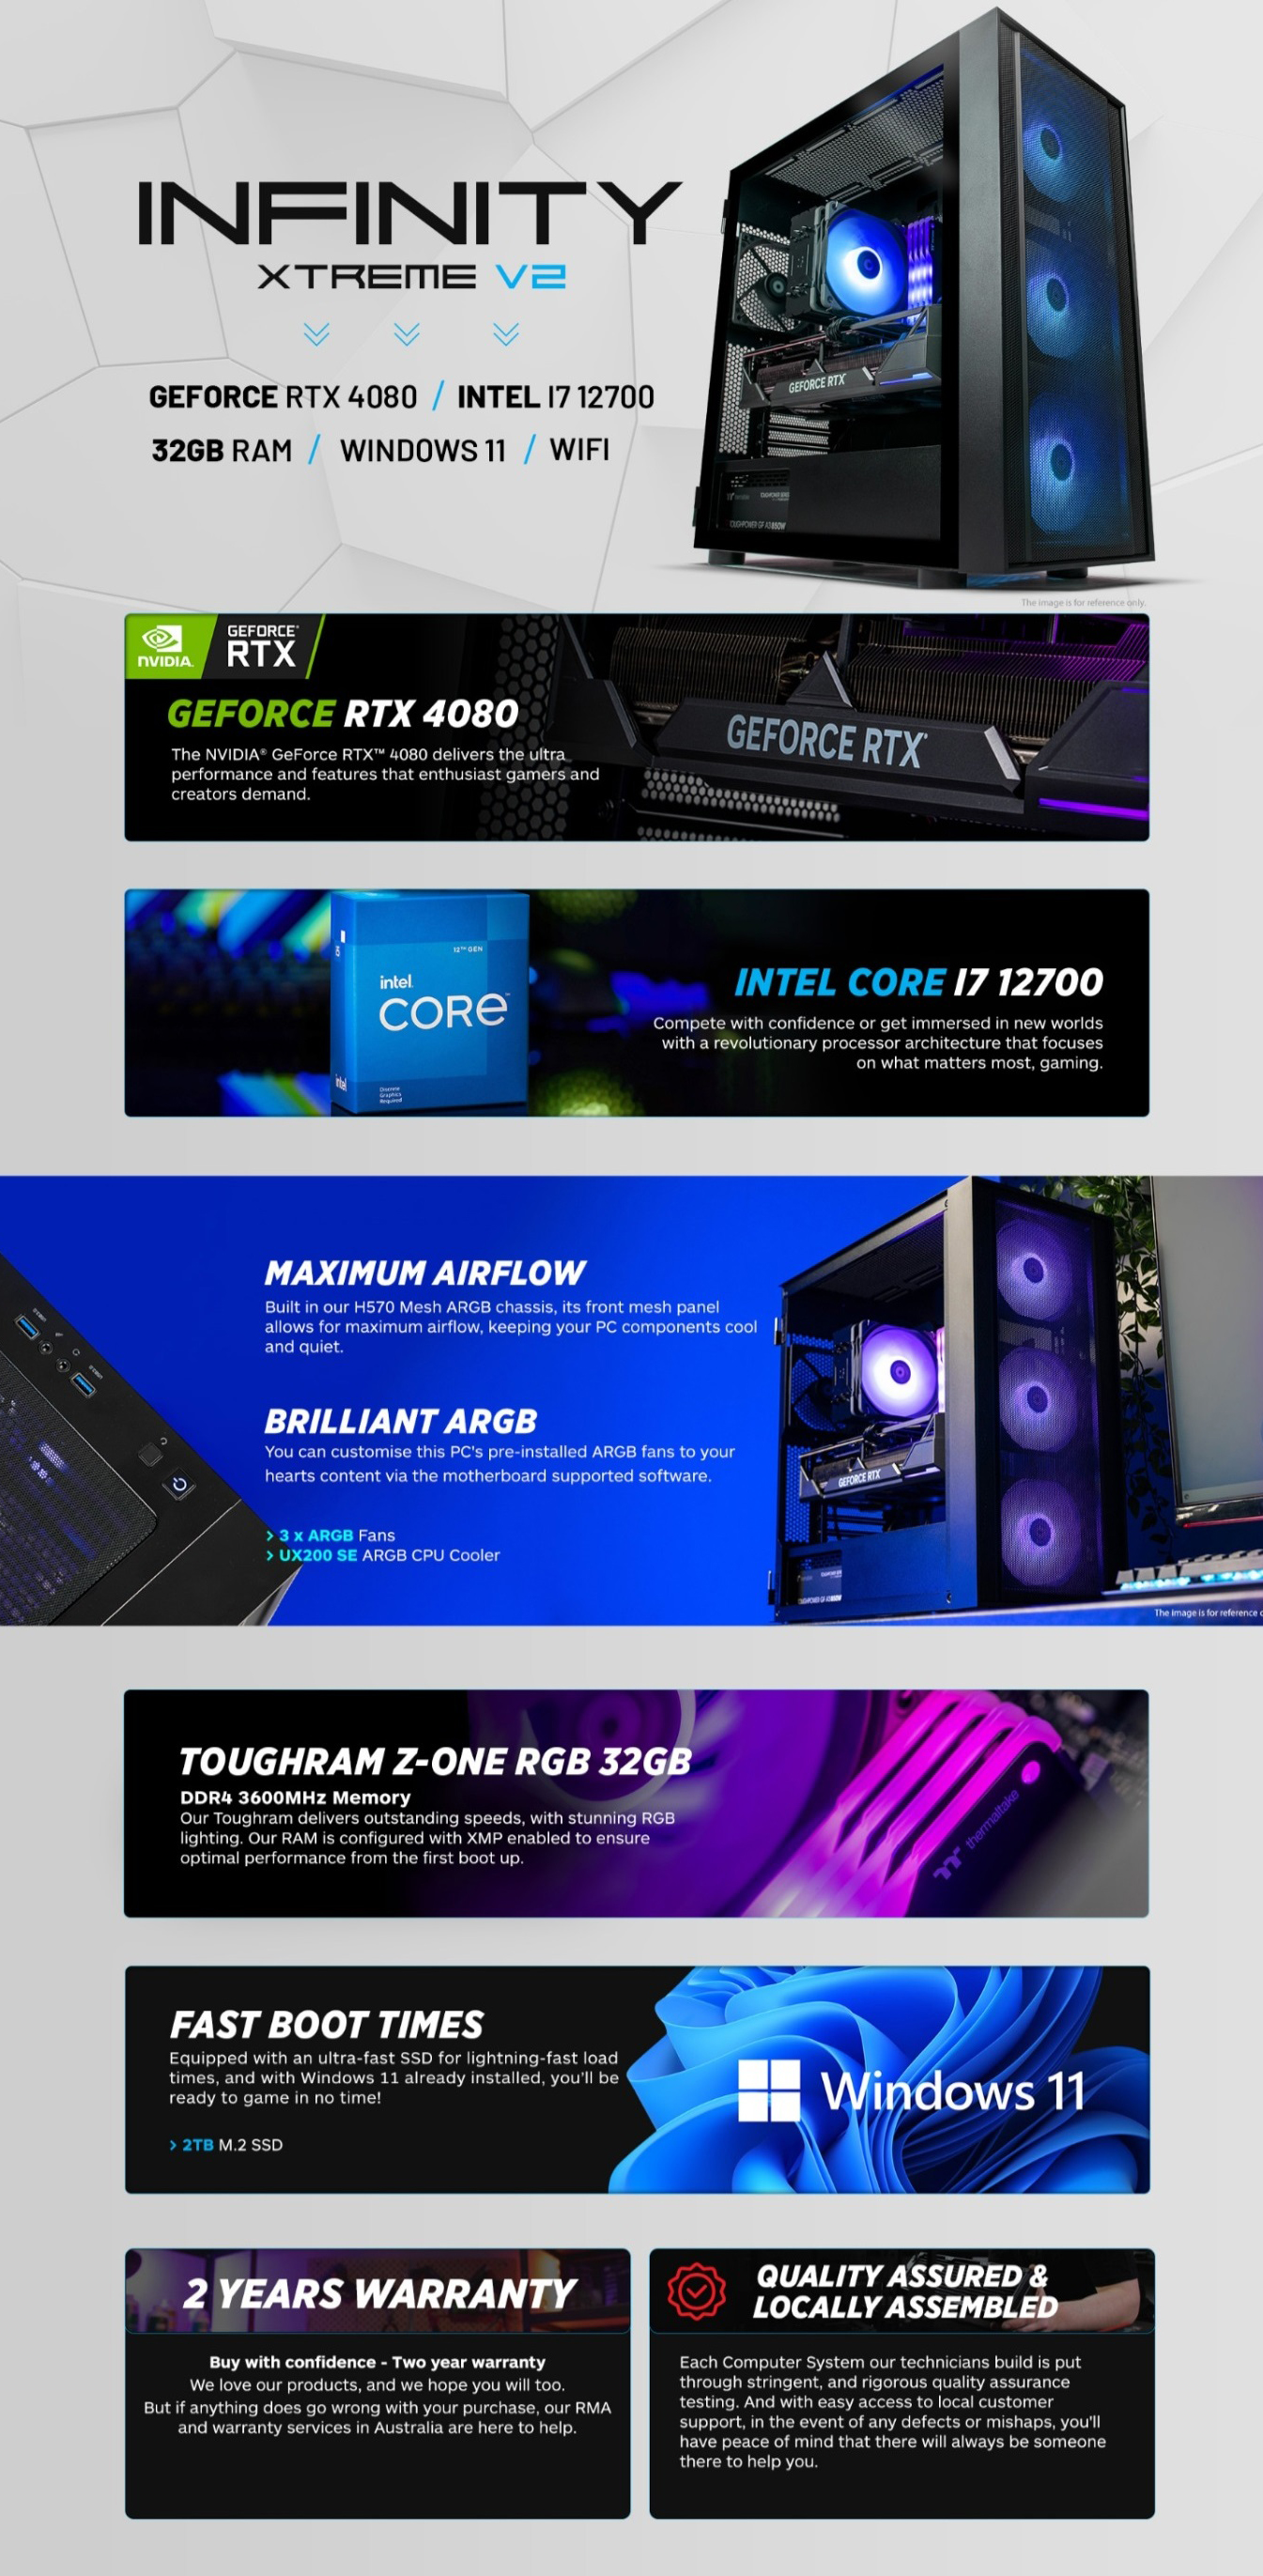 Branded-Gaming-PCs-Thermaltake-Infinity-Xtreme-V2-i7-12700KF-RTX-4080-2TB-SSD-32GB-RAM-W11H-Gaming-PC-CA-4J1-00D1WA-A0-6